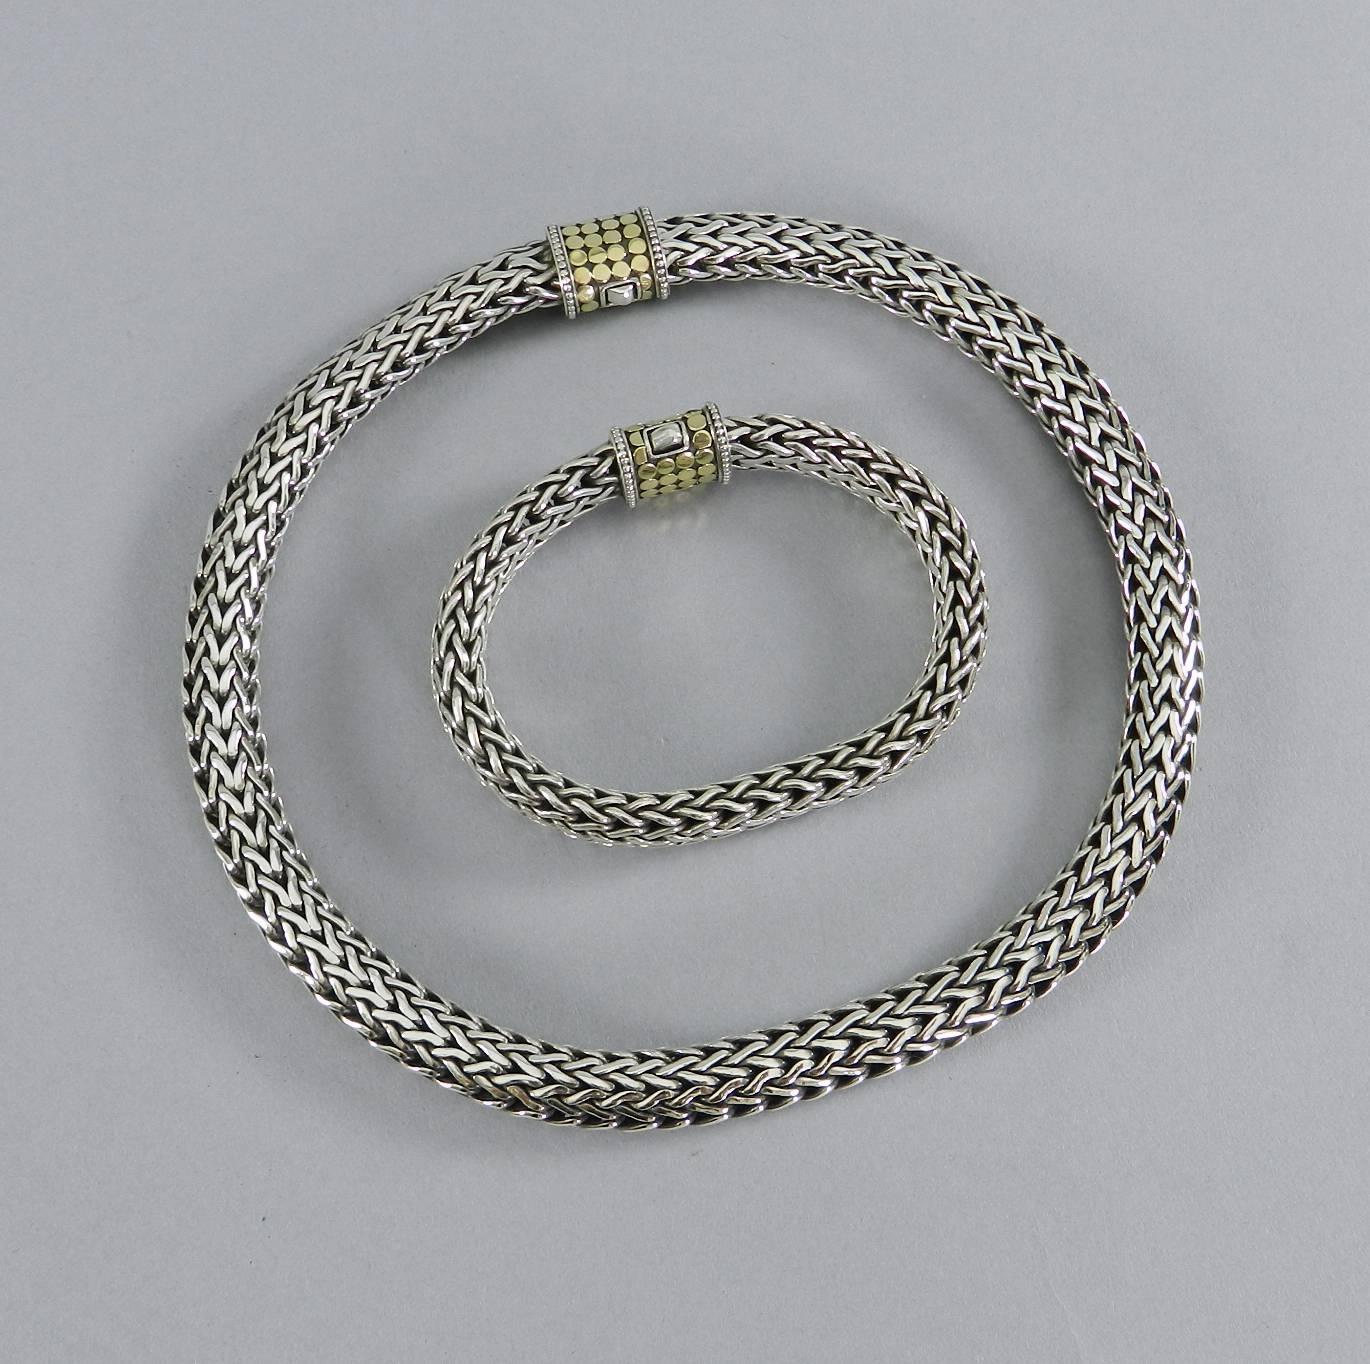 John Hardy sterling silver and 18k yellow gold dots classic woven necklace and bracelet 2pc set. Excellent pre-owned condition. 10.5mm width. Bracelet and necklace can be worn attached to make a longer necklace. Necklace measures 16